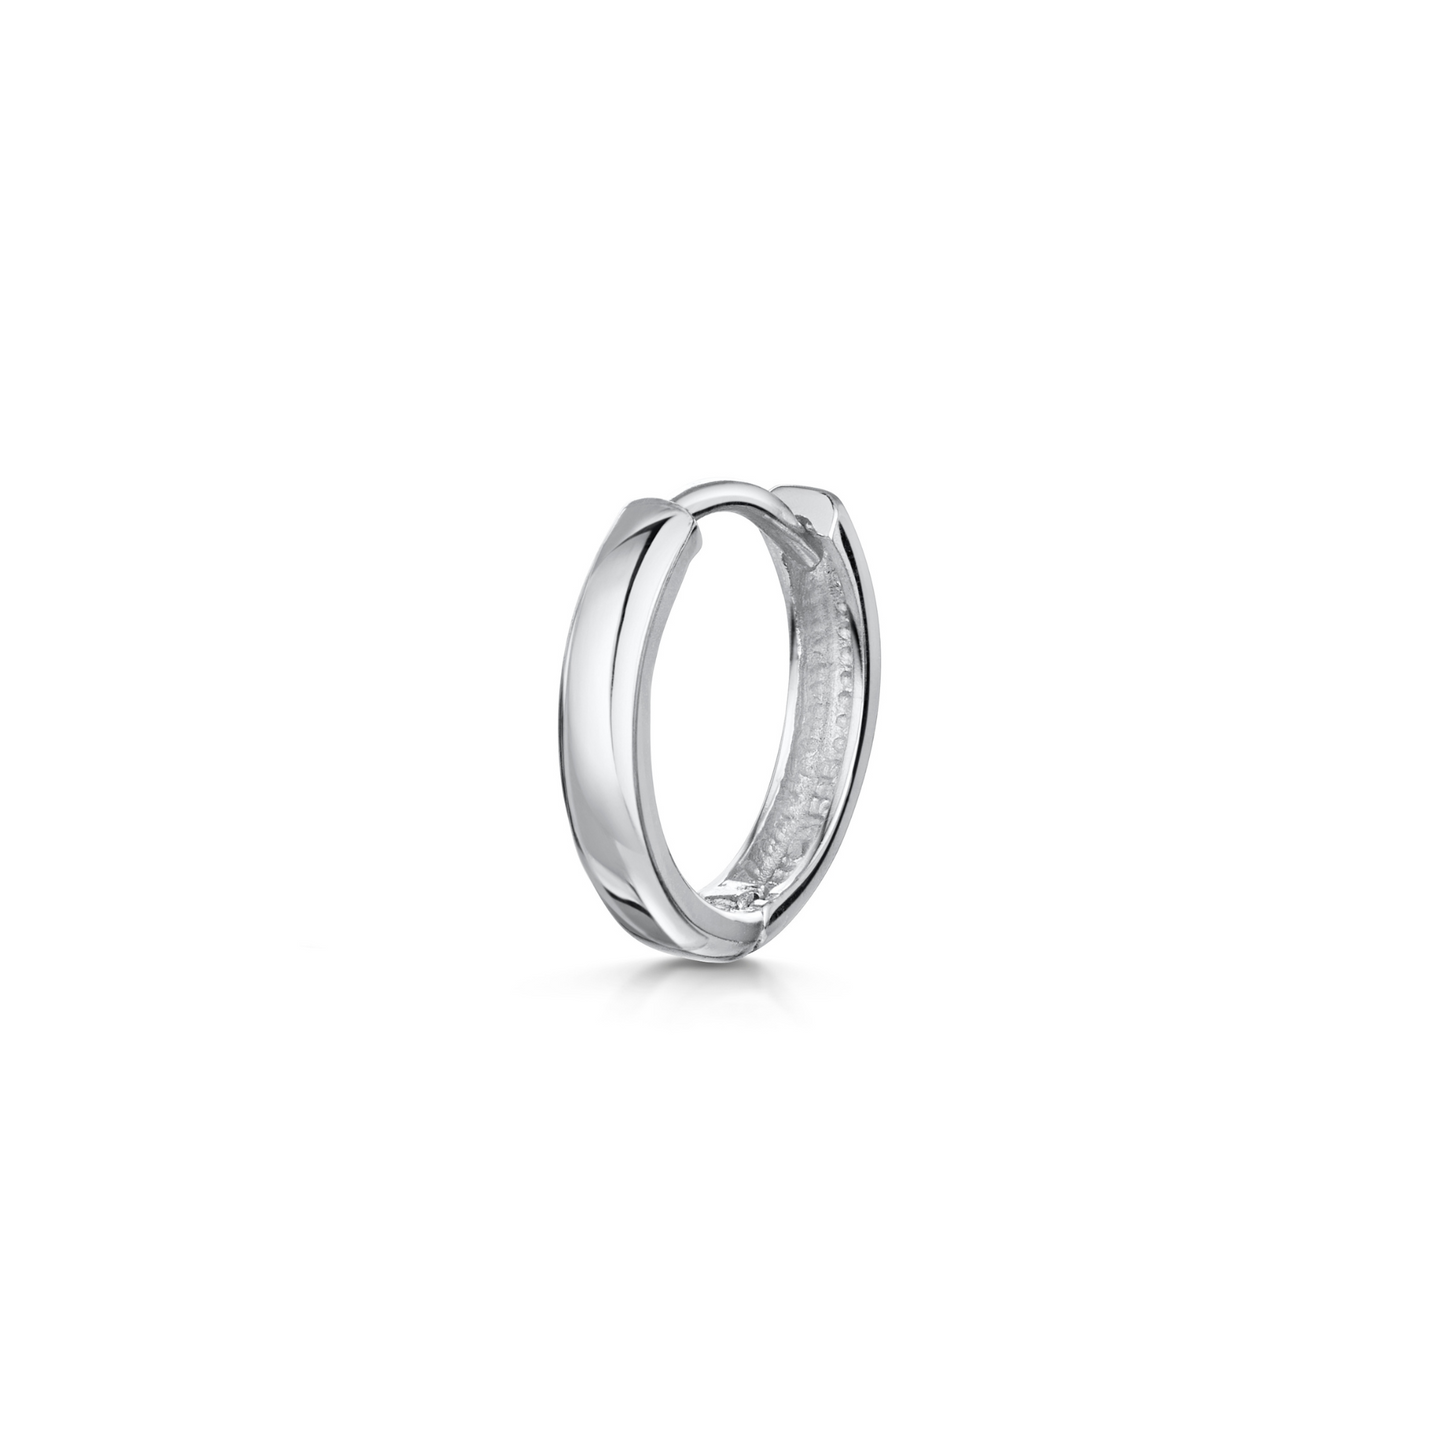 9k solid white gold simple huggie earring